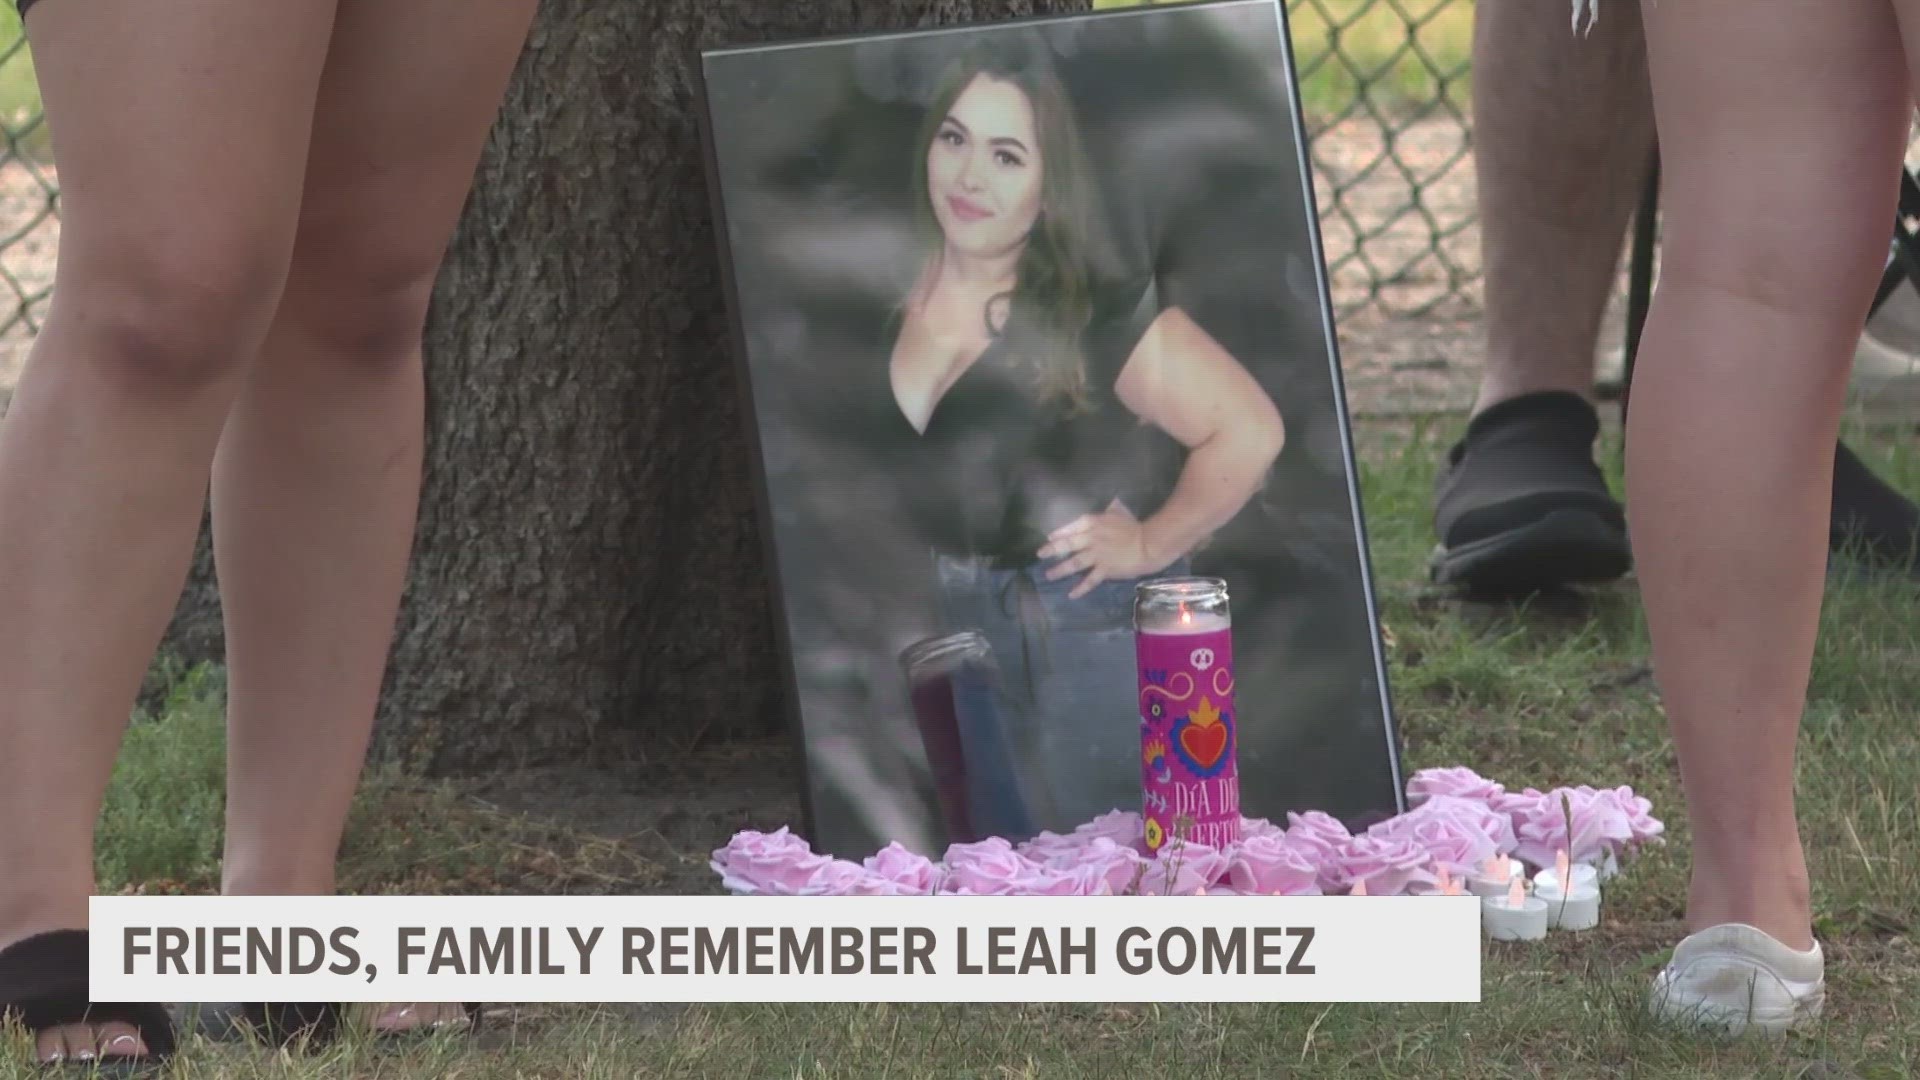 There were around 100 people there to celebrate Gomez's life.